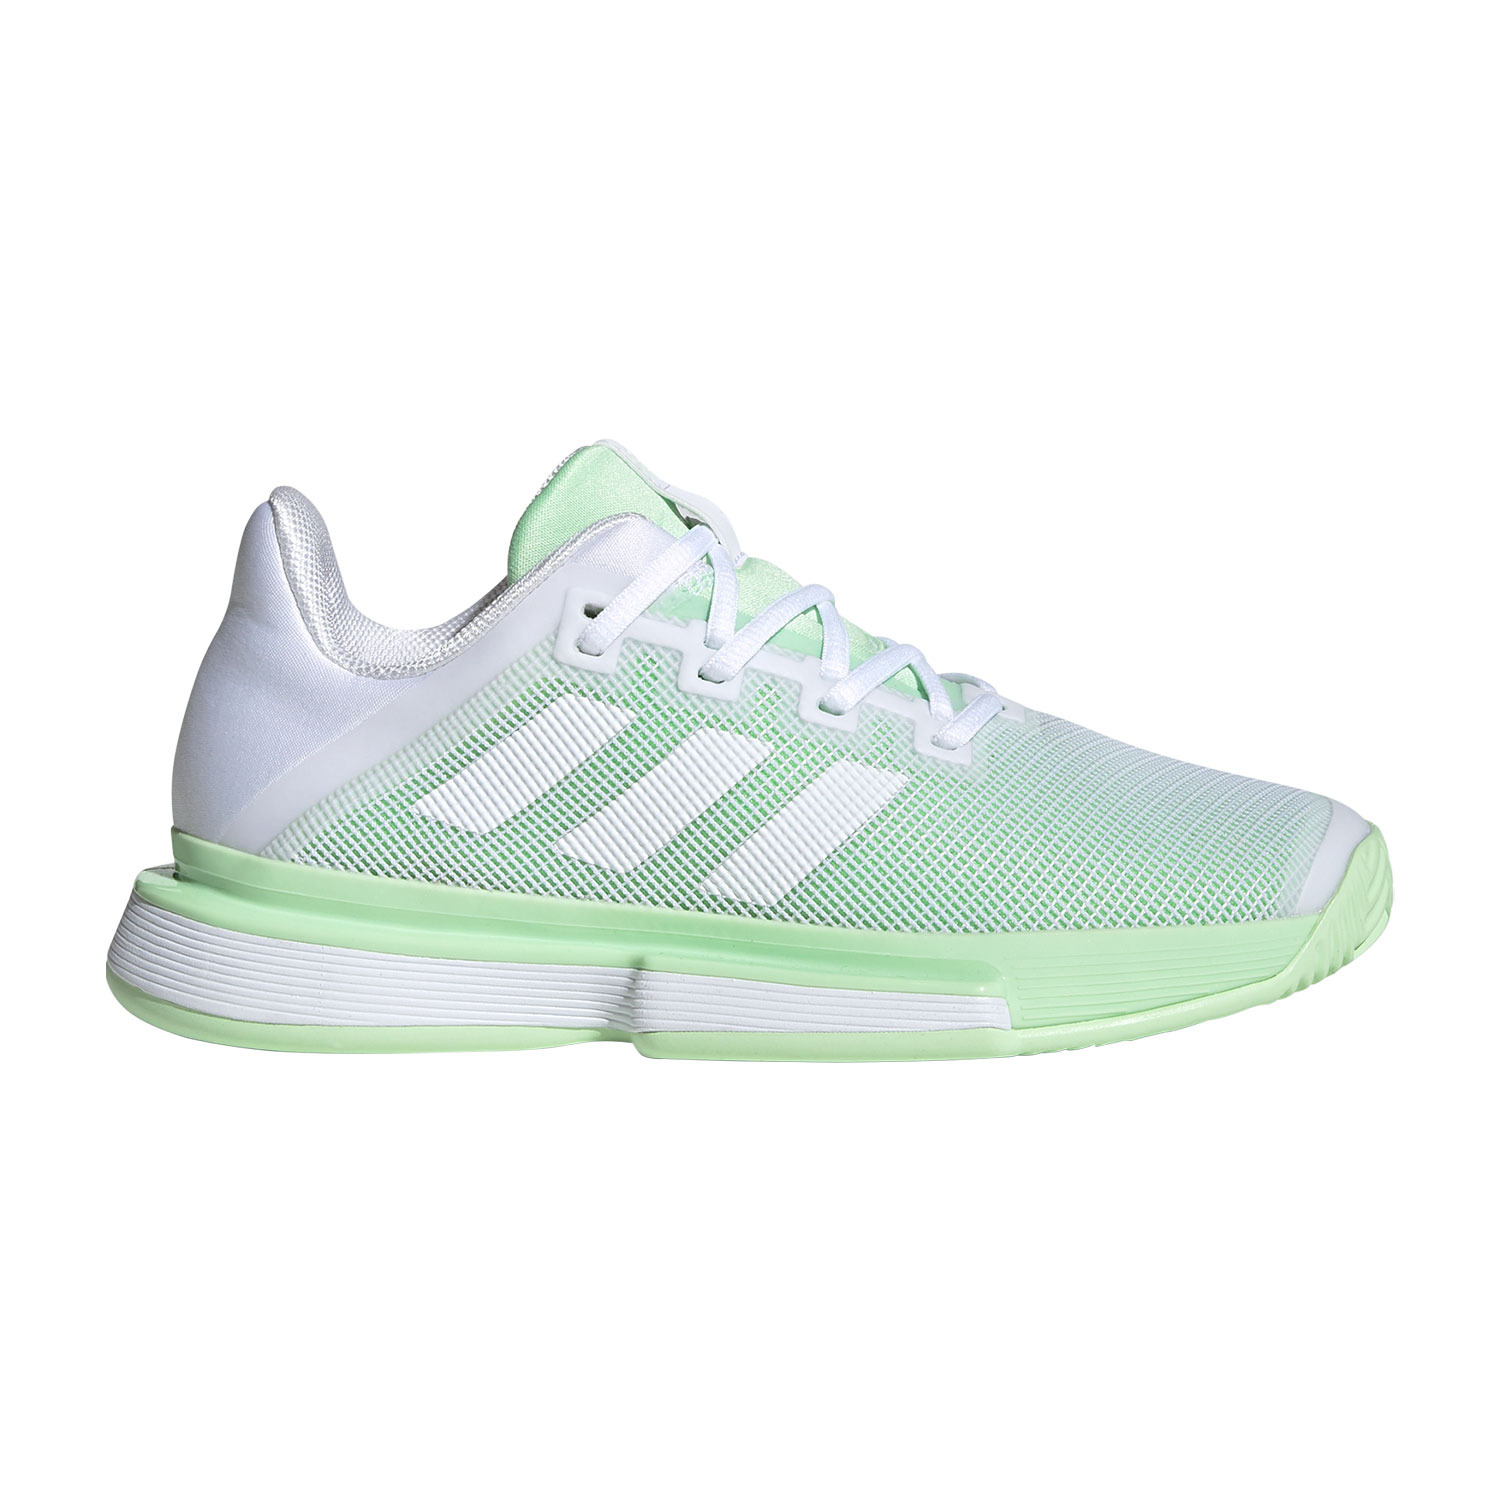 adidas SoleMatch Bounce Zapatillas Tenis Mujer - Ftwr White